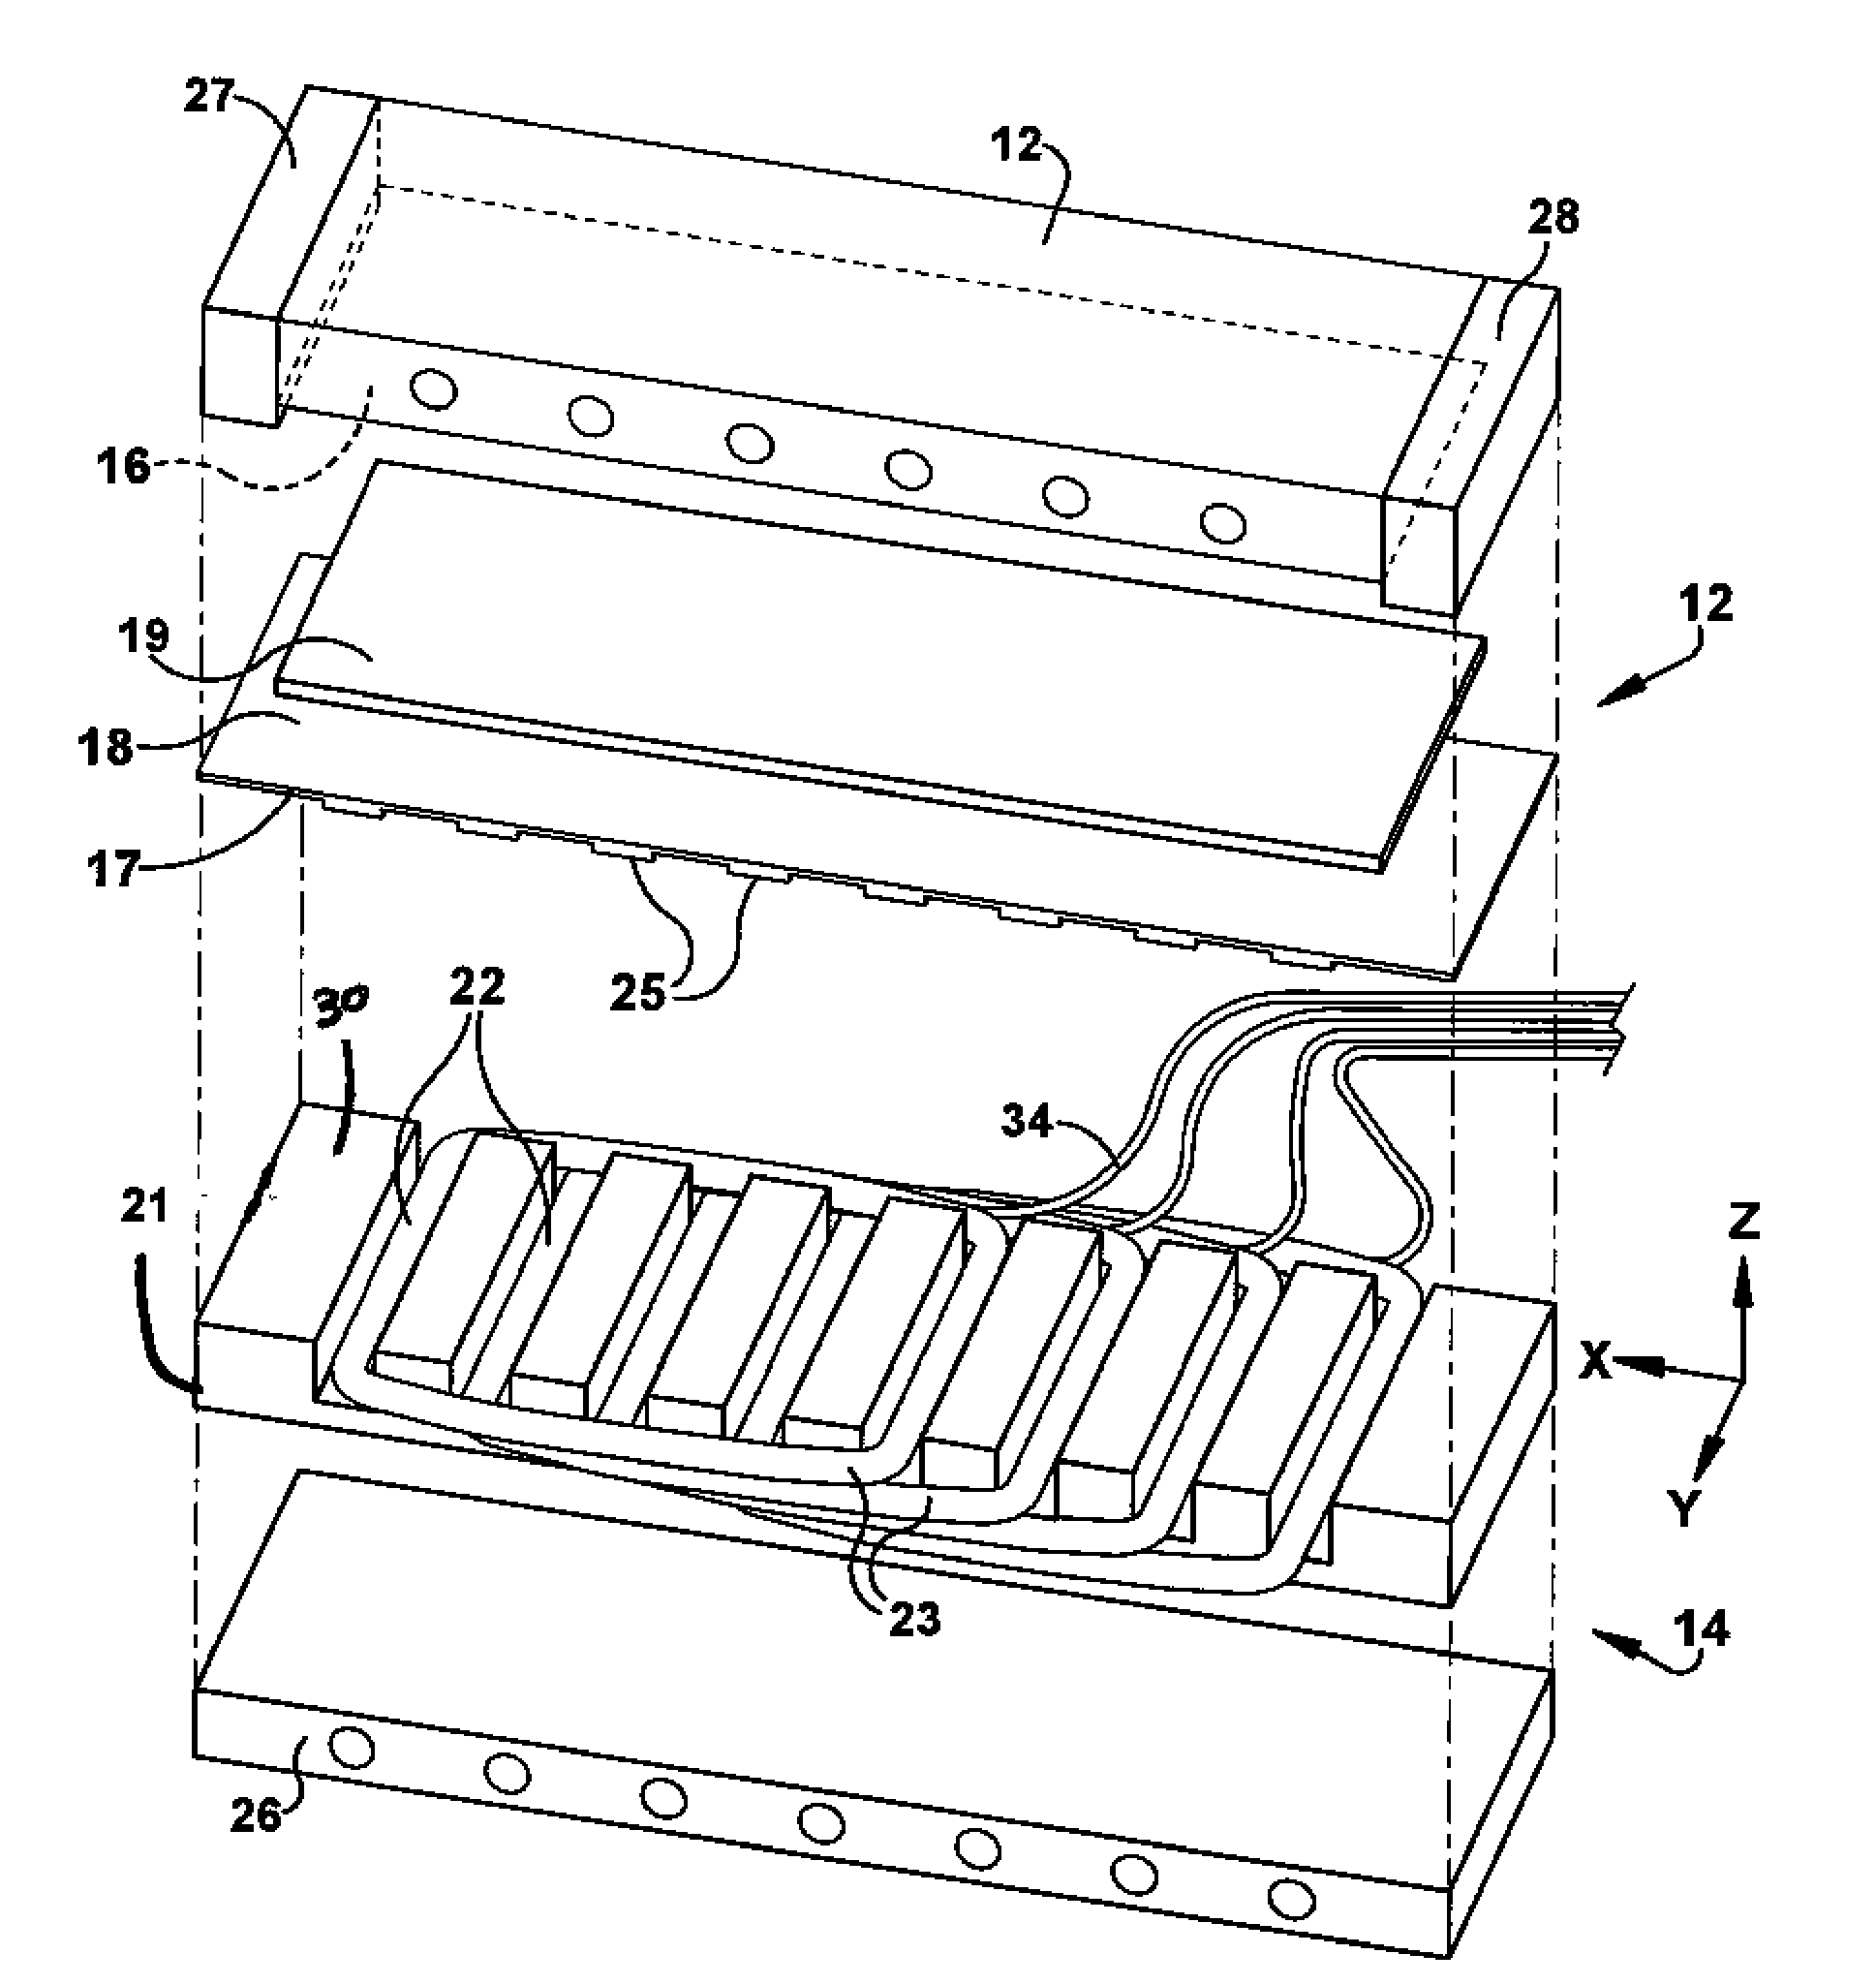 Mold apparatus for forming polymer and method